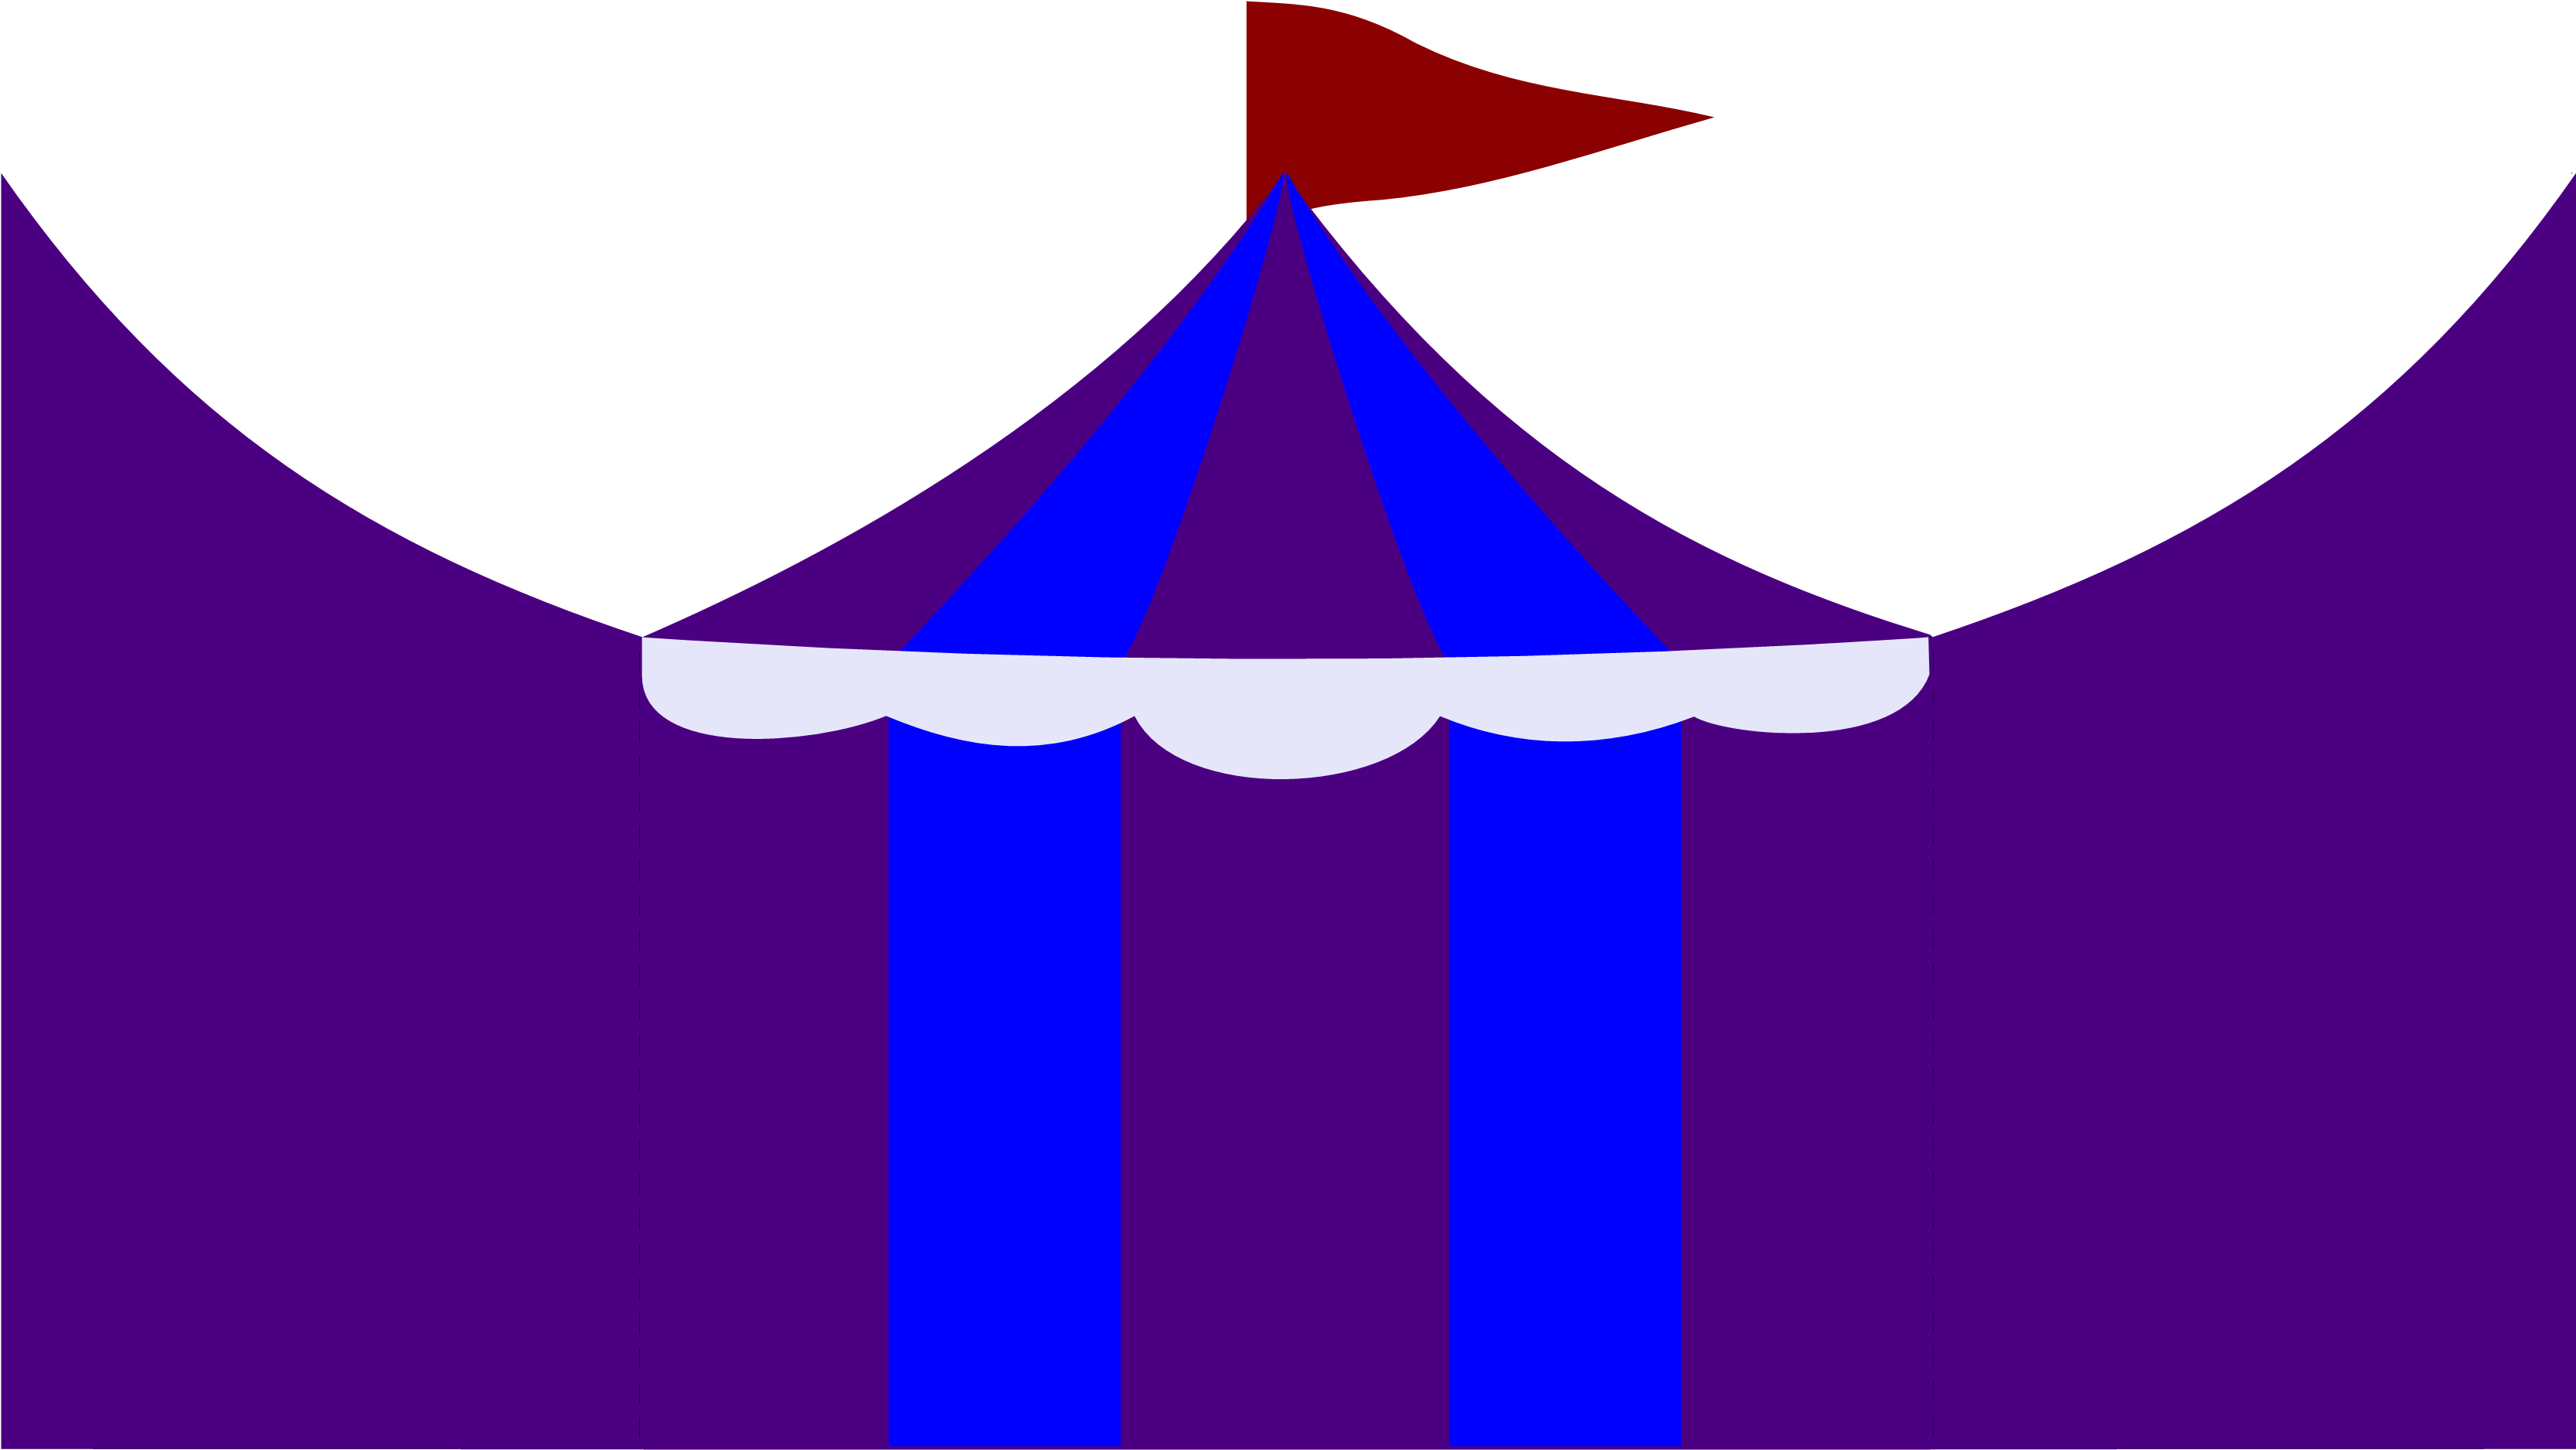 Circus Tent-ply - Circus Tent-ply (3398x1943)